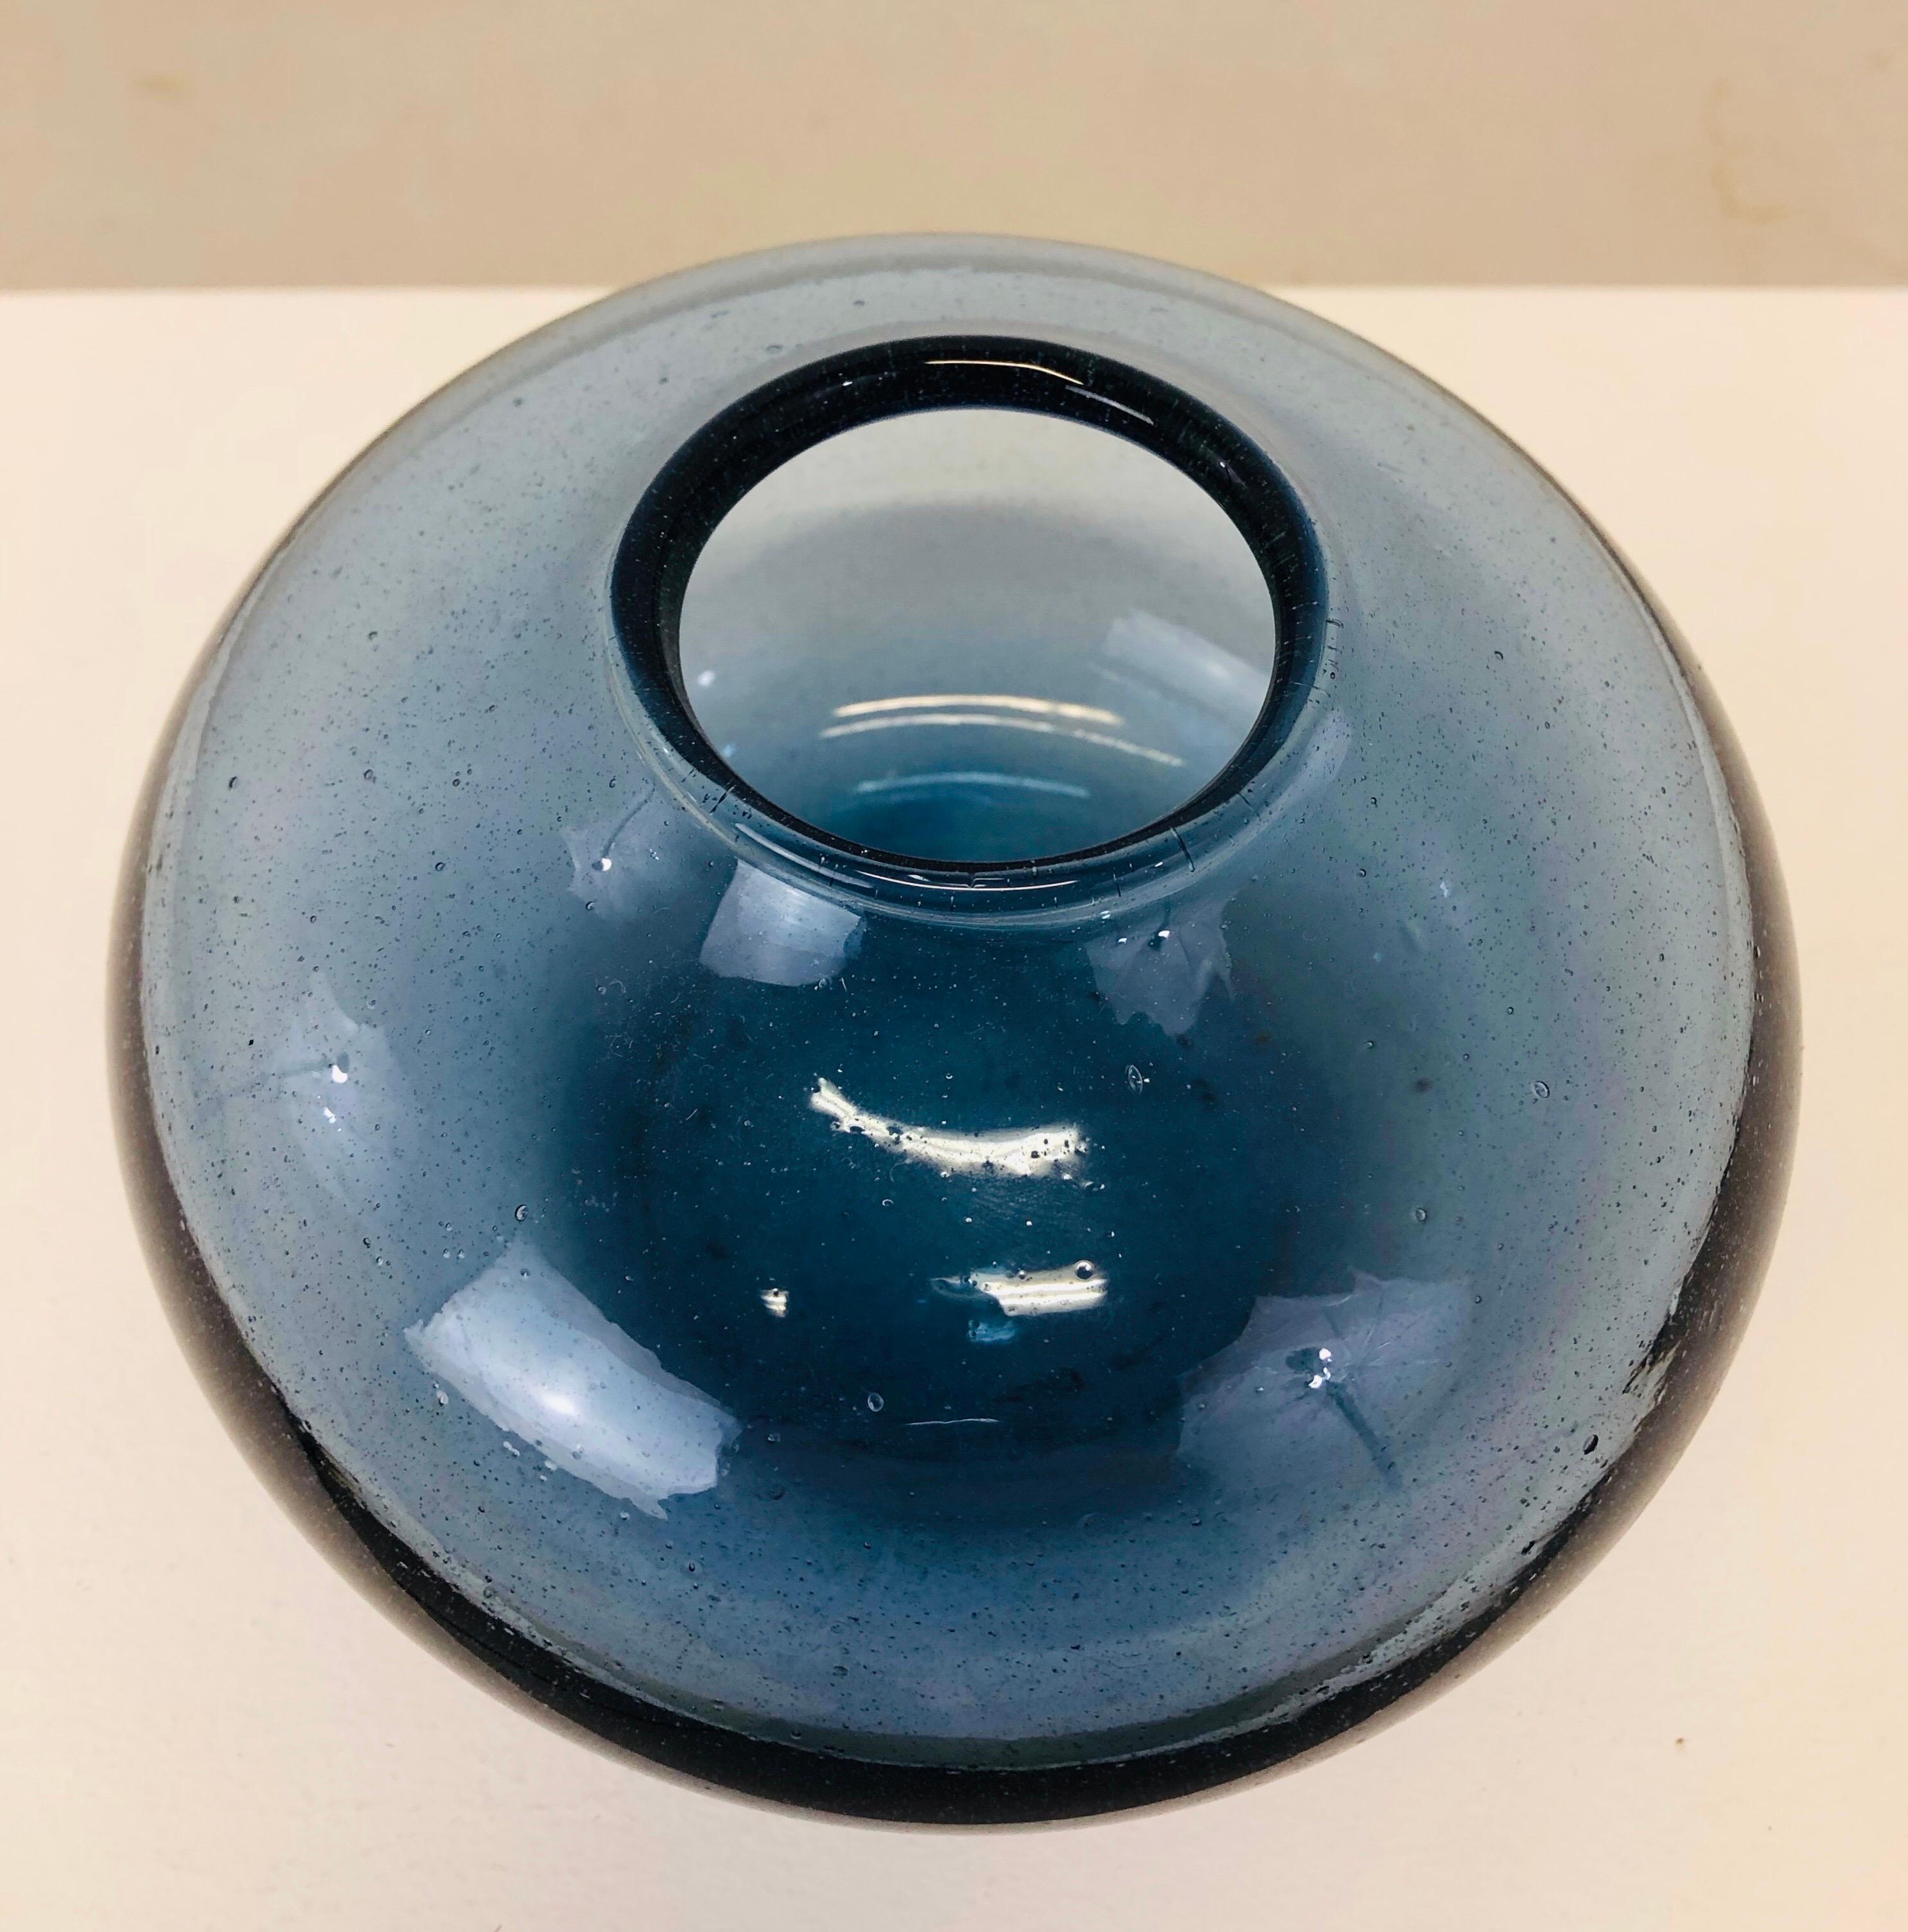 Claude Morin (1932-2021)

One blue glass vase by french artist Claude Morin

Signed on the back.
MORIN 
DIEULEFIT

Original perfect condition.